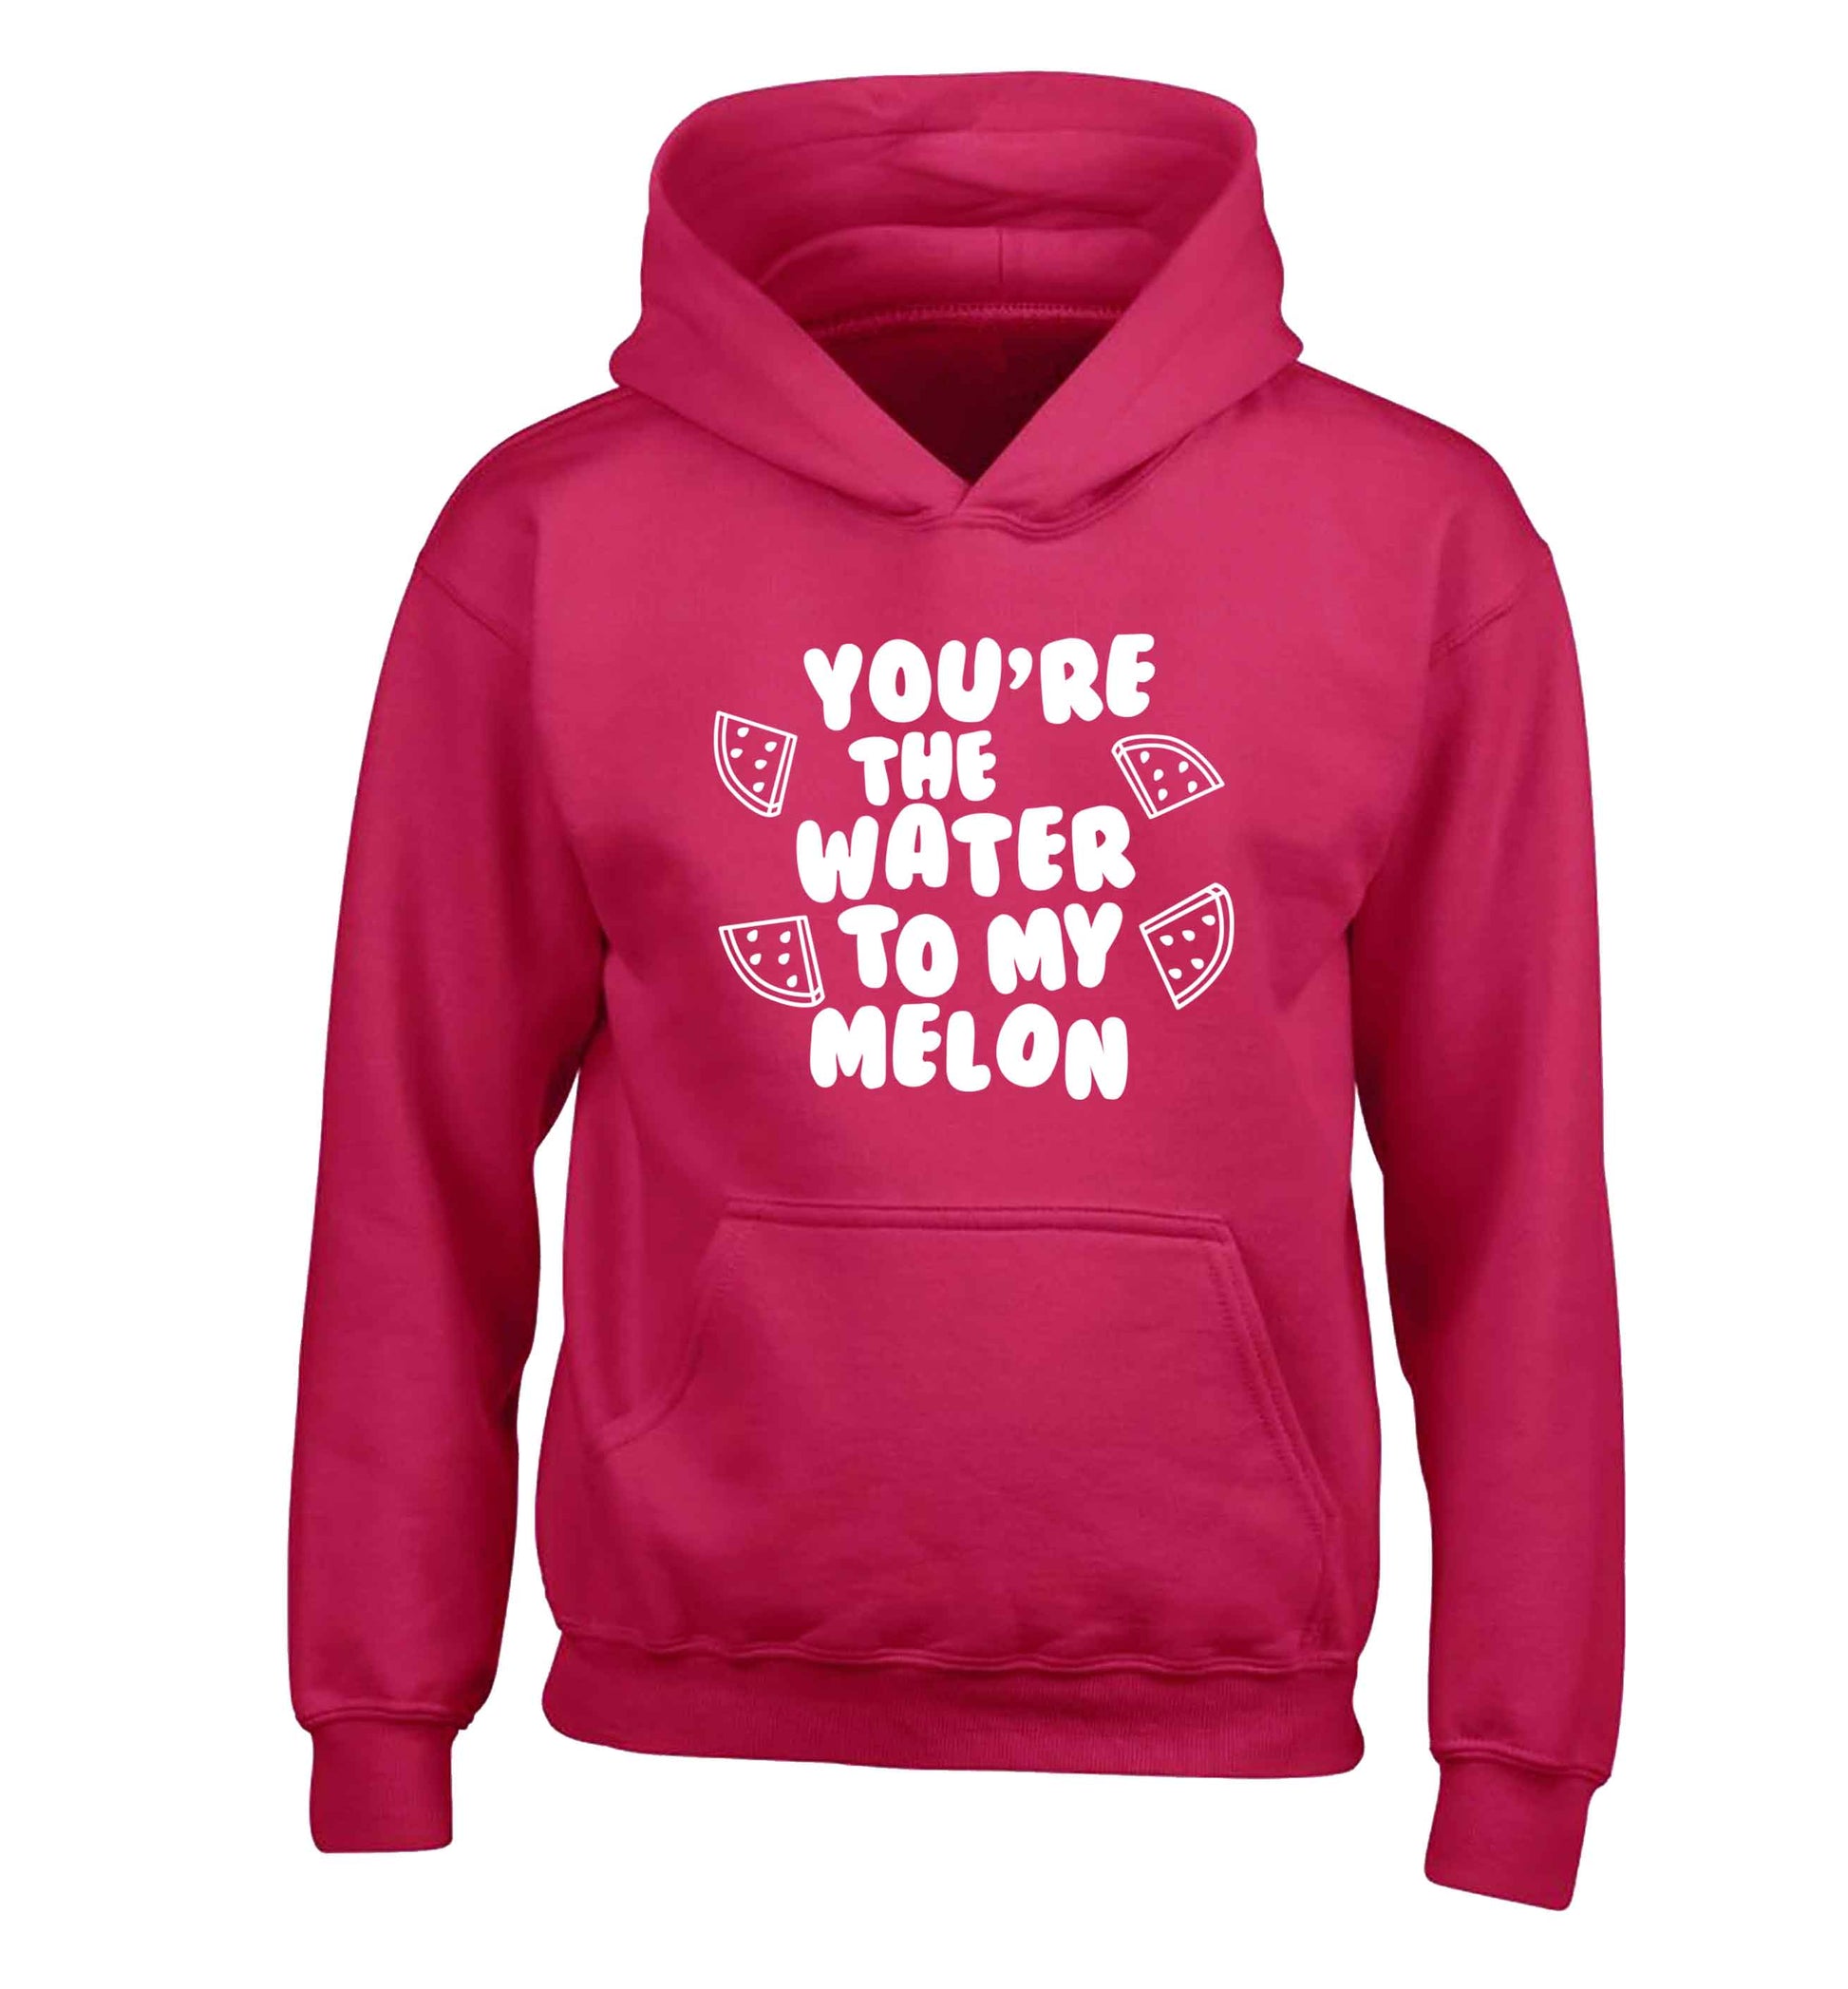 You're the water to my melon children's pink hoodie 12-13 Years